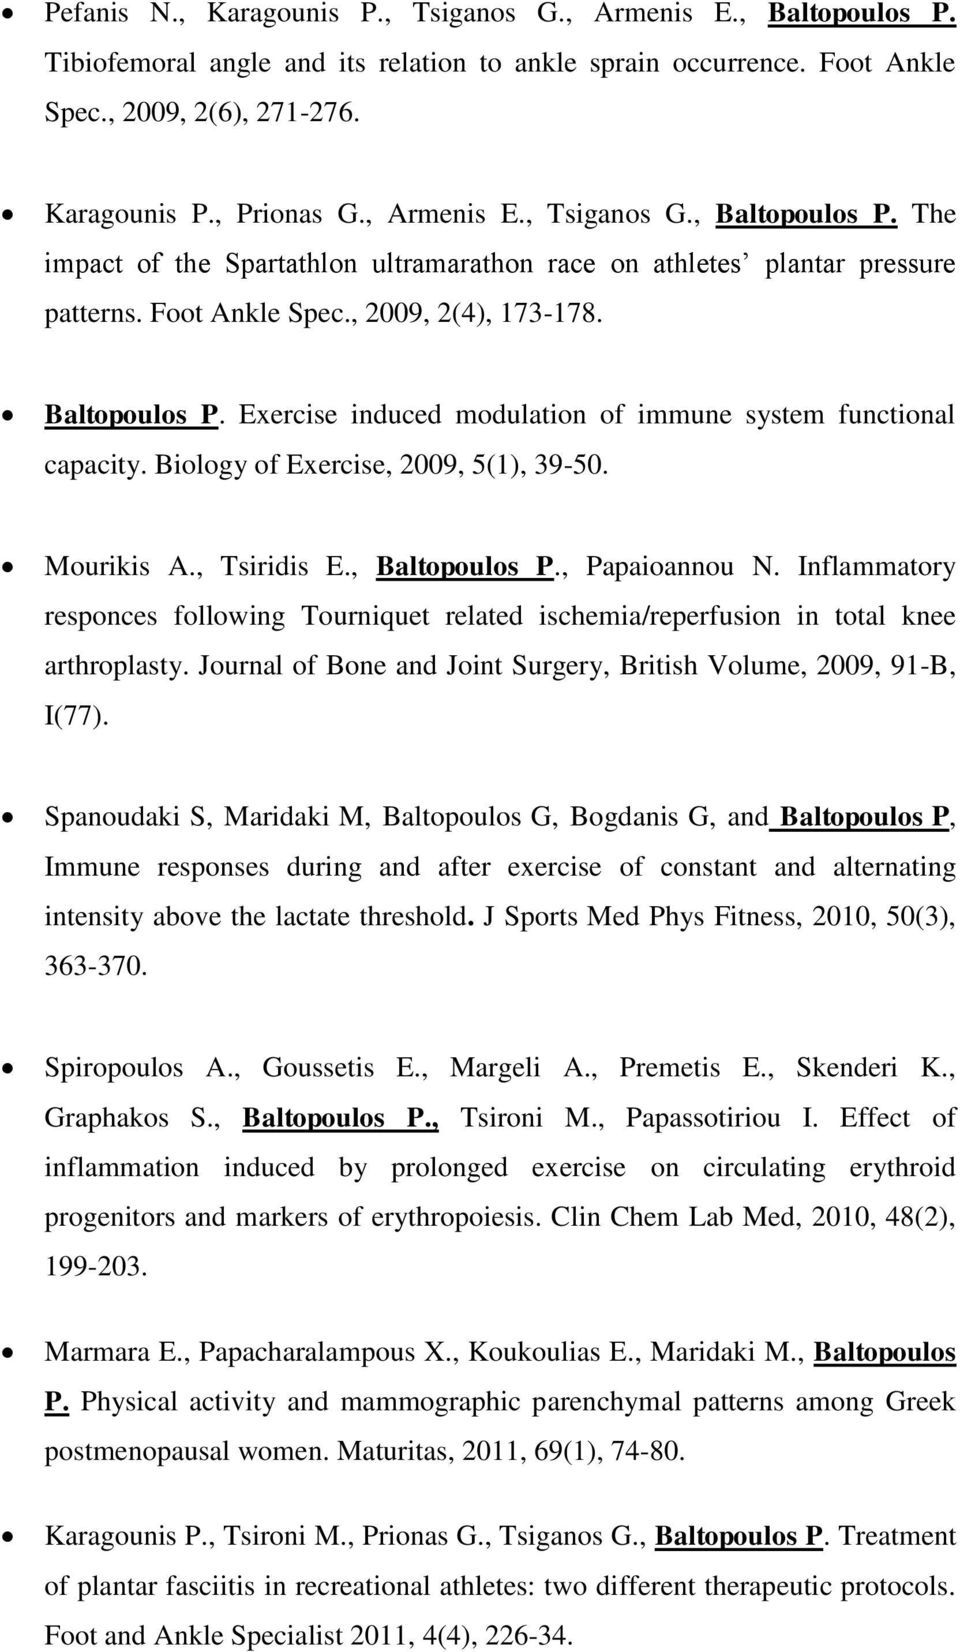 Biology of Exercise, 2009, 5(1), 39-50. Mourikis A., Tsiridis E., Baltopoulos P., Papaioannou N. Inflammatory responces following Tourniquet related ischemia/reperfusion in total knee arthroplasty.